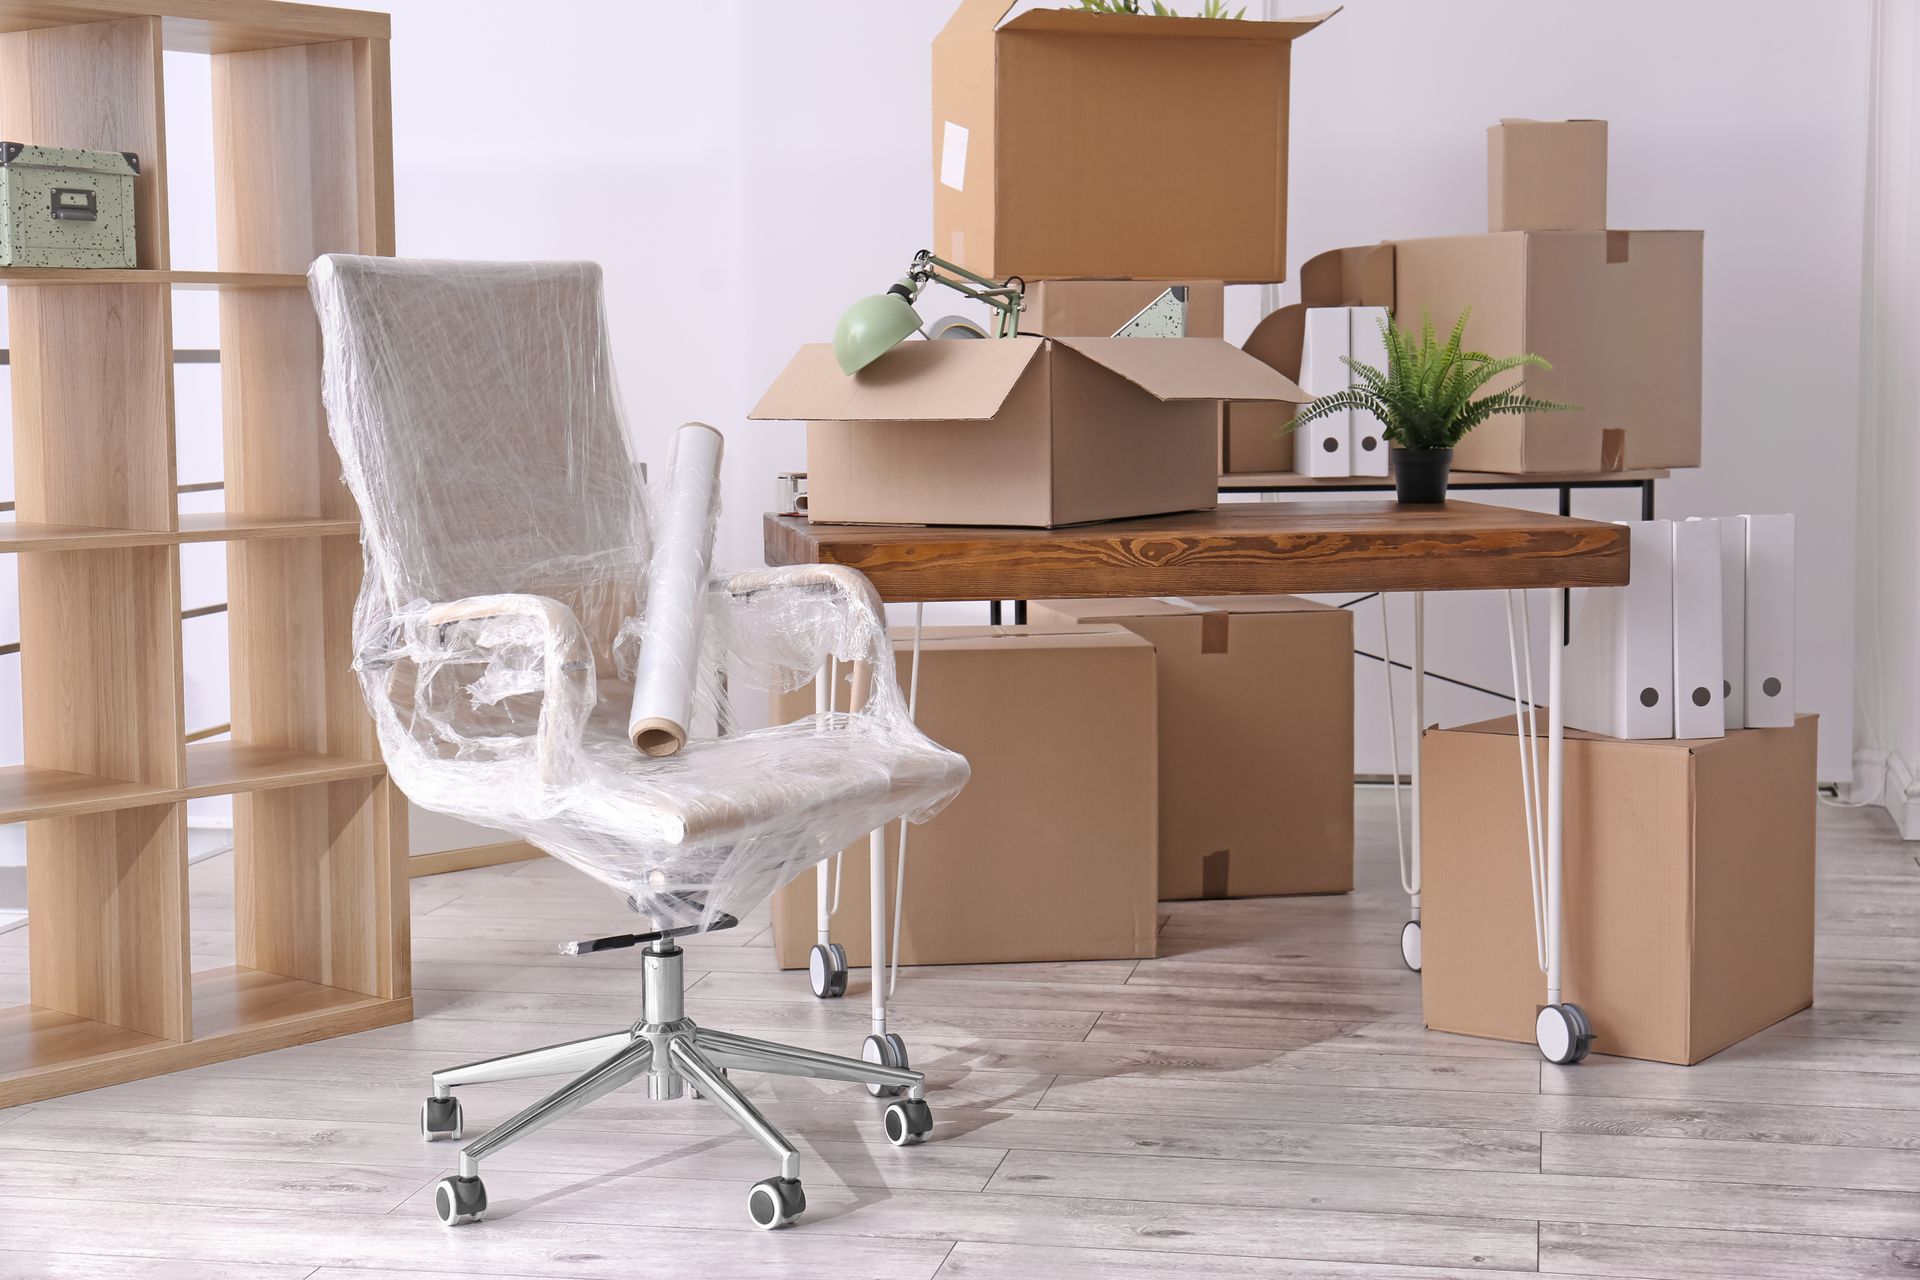 chair and moving boxes in office room